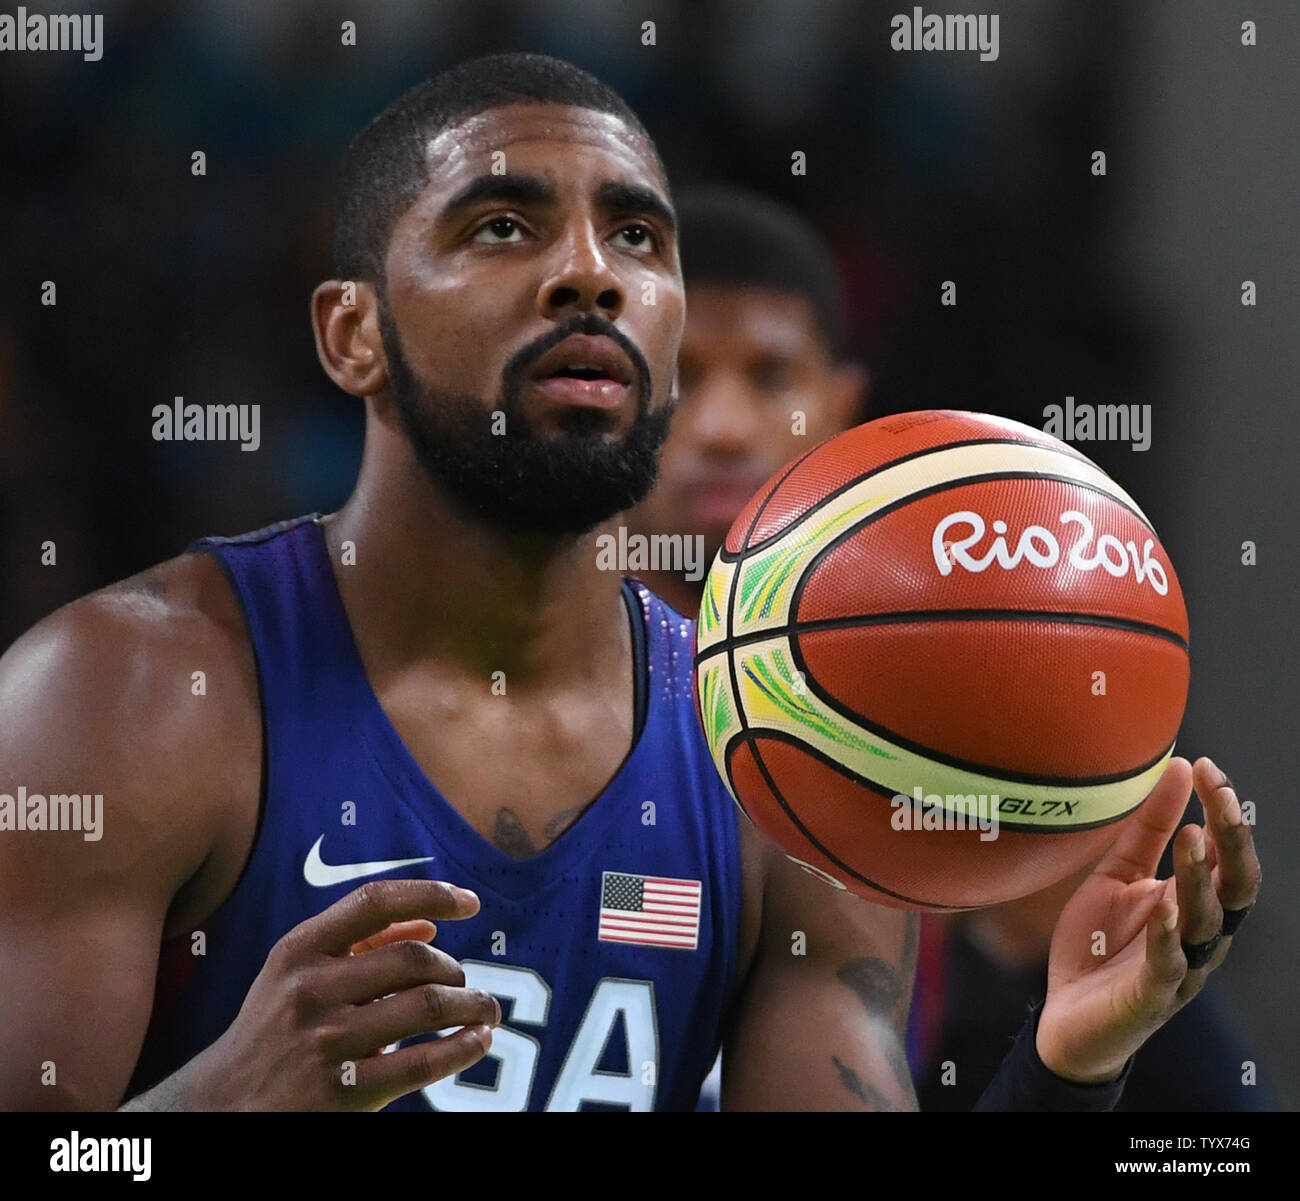 USA' s Kyrie Irving spins the basketball before delivering a coffin nail from the free throw line in the closing minute against Australia in Basketball at the 2016 Rio Summer Olympics in Rio de Janeiro, Brazil, August 10, 2016.  The USA defeated Australia 98-88.  Photo by Terry Schmitt/UPI Stock Photo